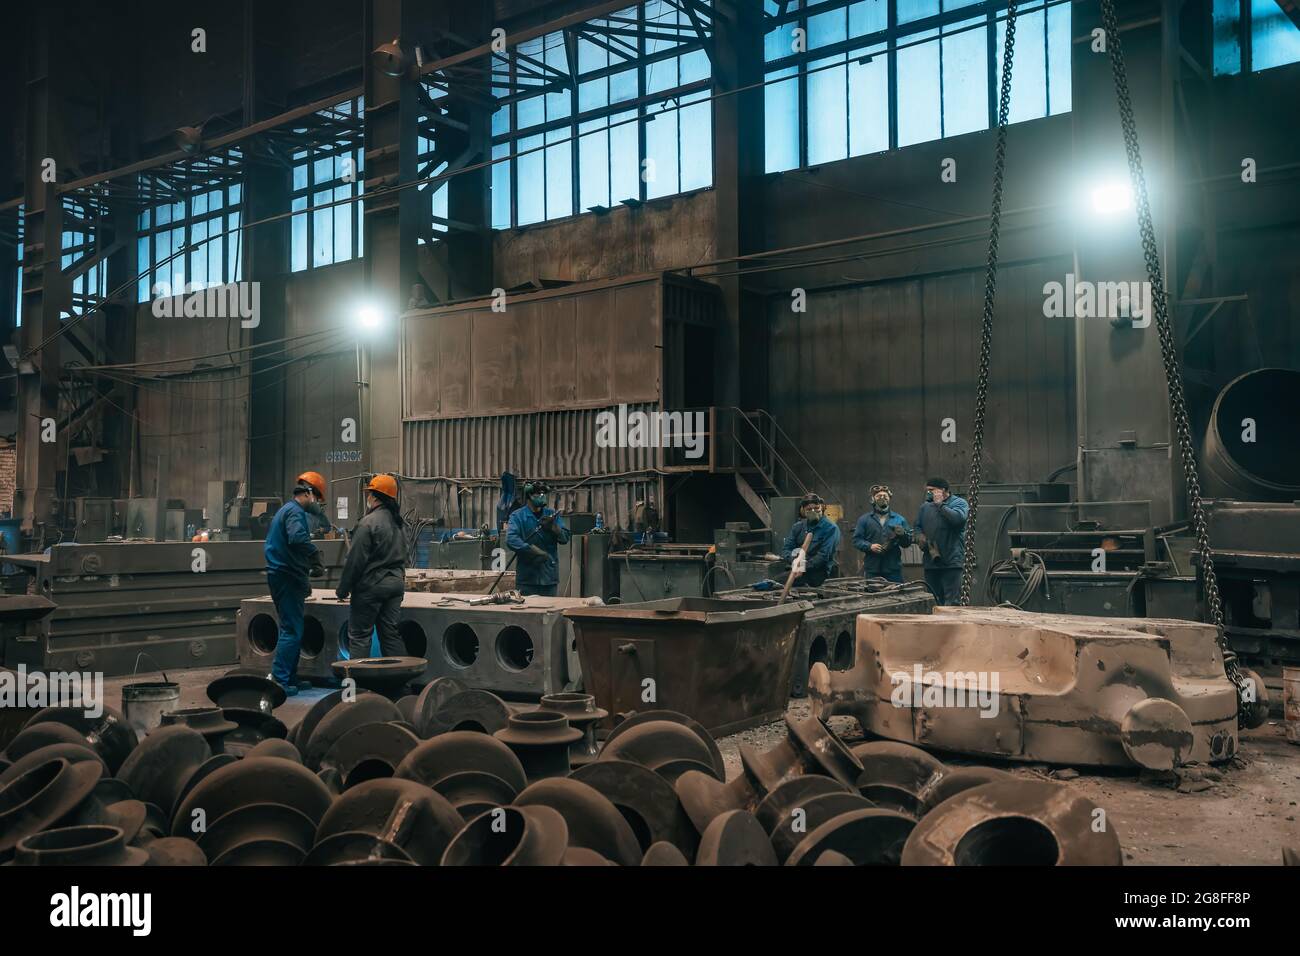 Heavy Industry manufacturing factory, metallurgical plant workshop inside. Metallurgy manufacturing steel products production. Stock Photo